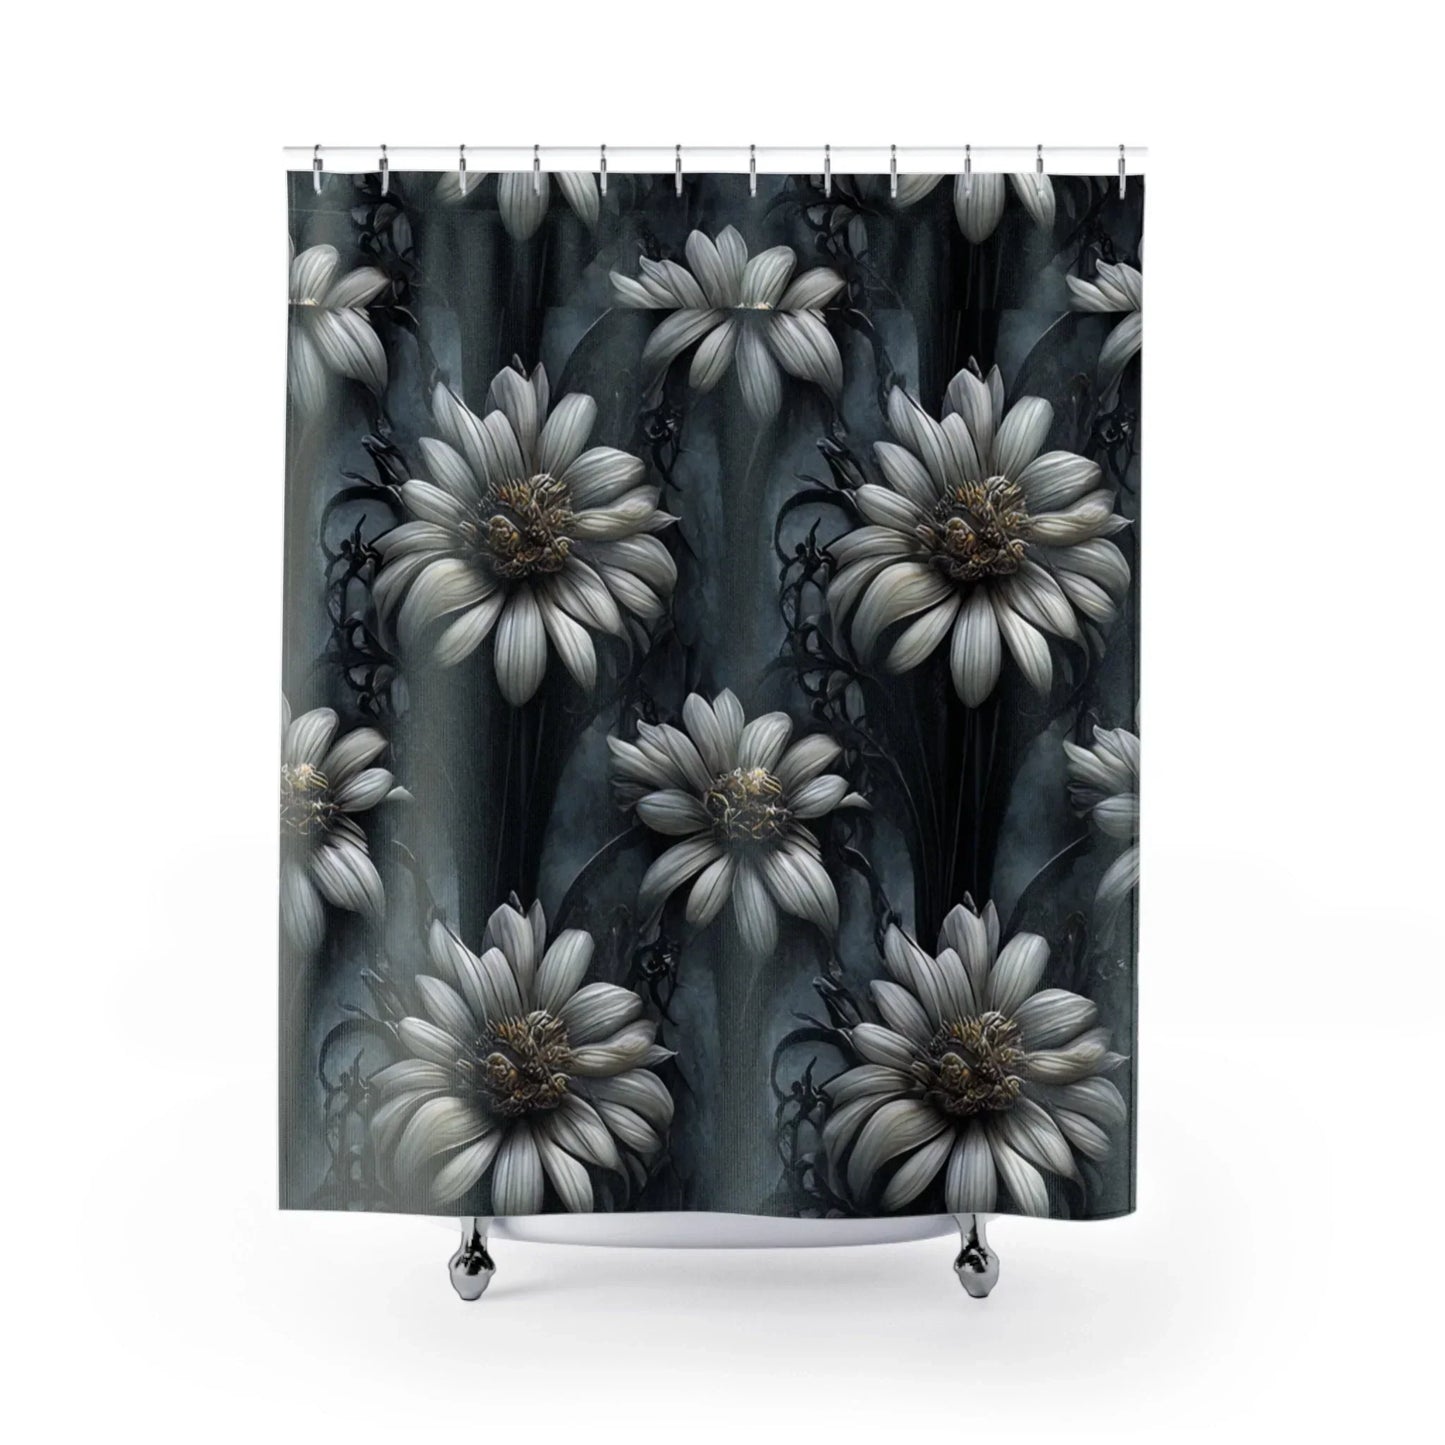 Gothic Shower Curtain, Black Floral Shower Curtain, Gothic Home Decor, Gothic Gifts, Sunflower Goth Shower Curtain Extra Long Shower Curtain